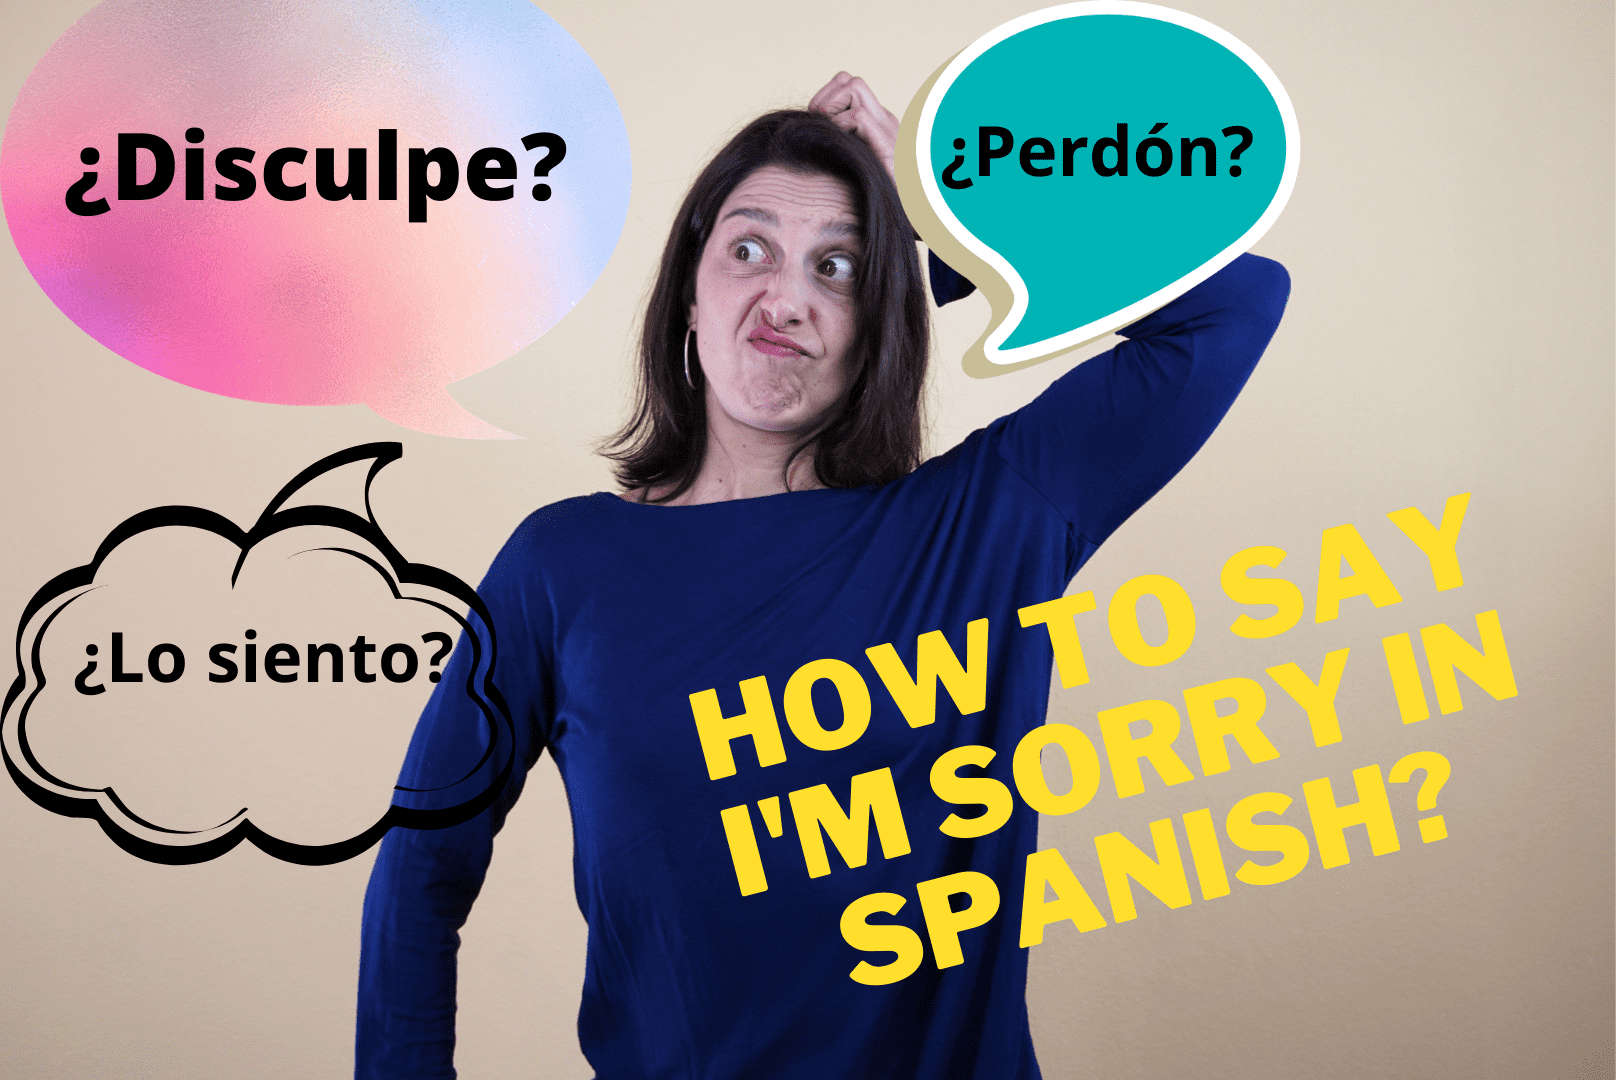 How to say I'm sorry in Spanish